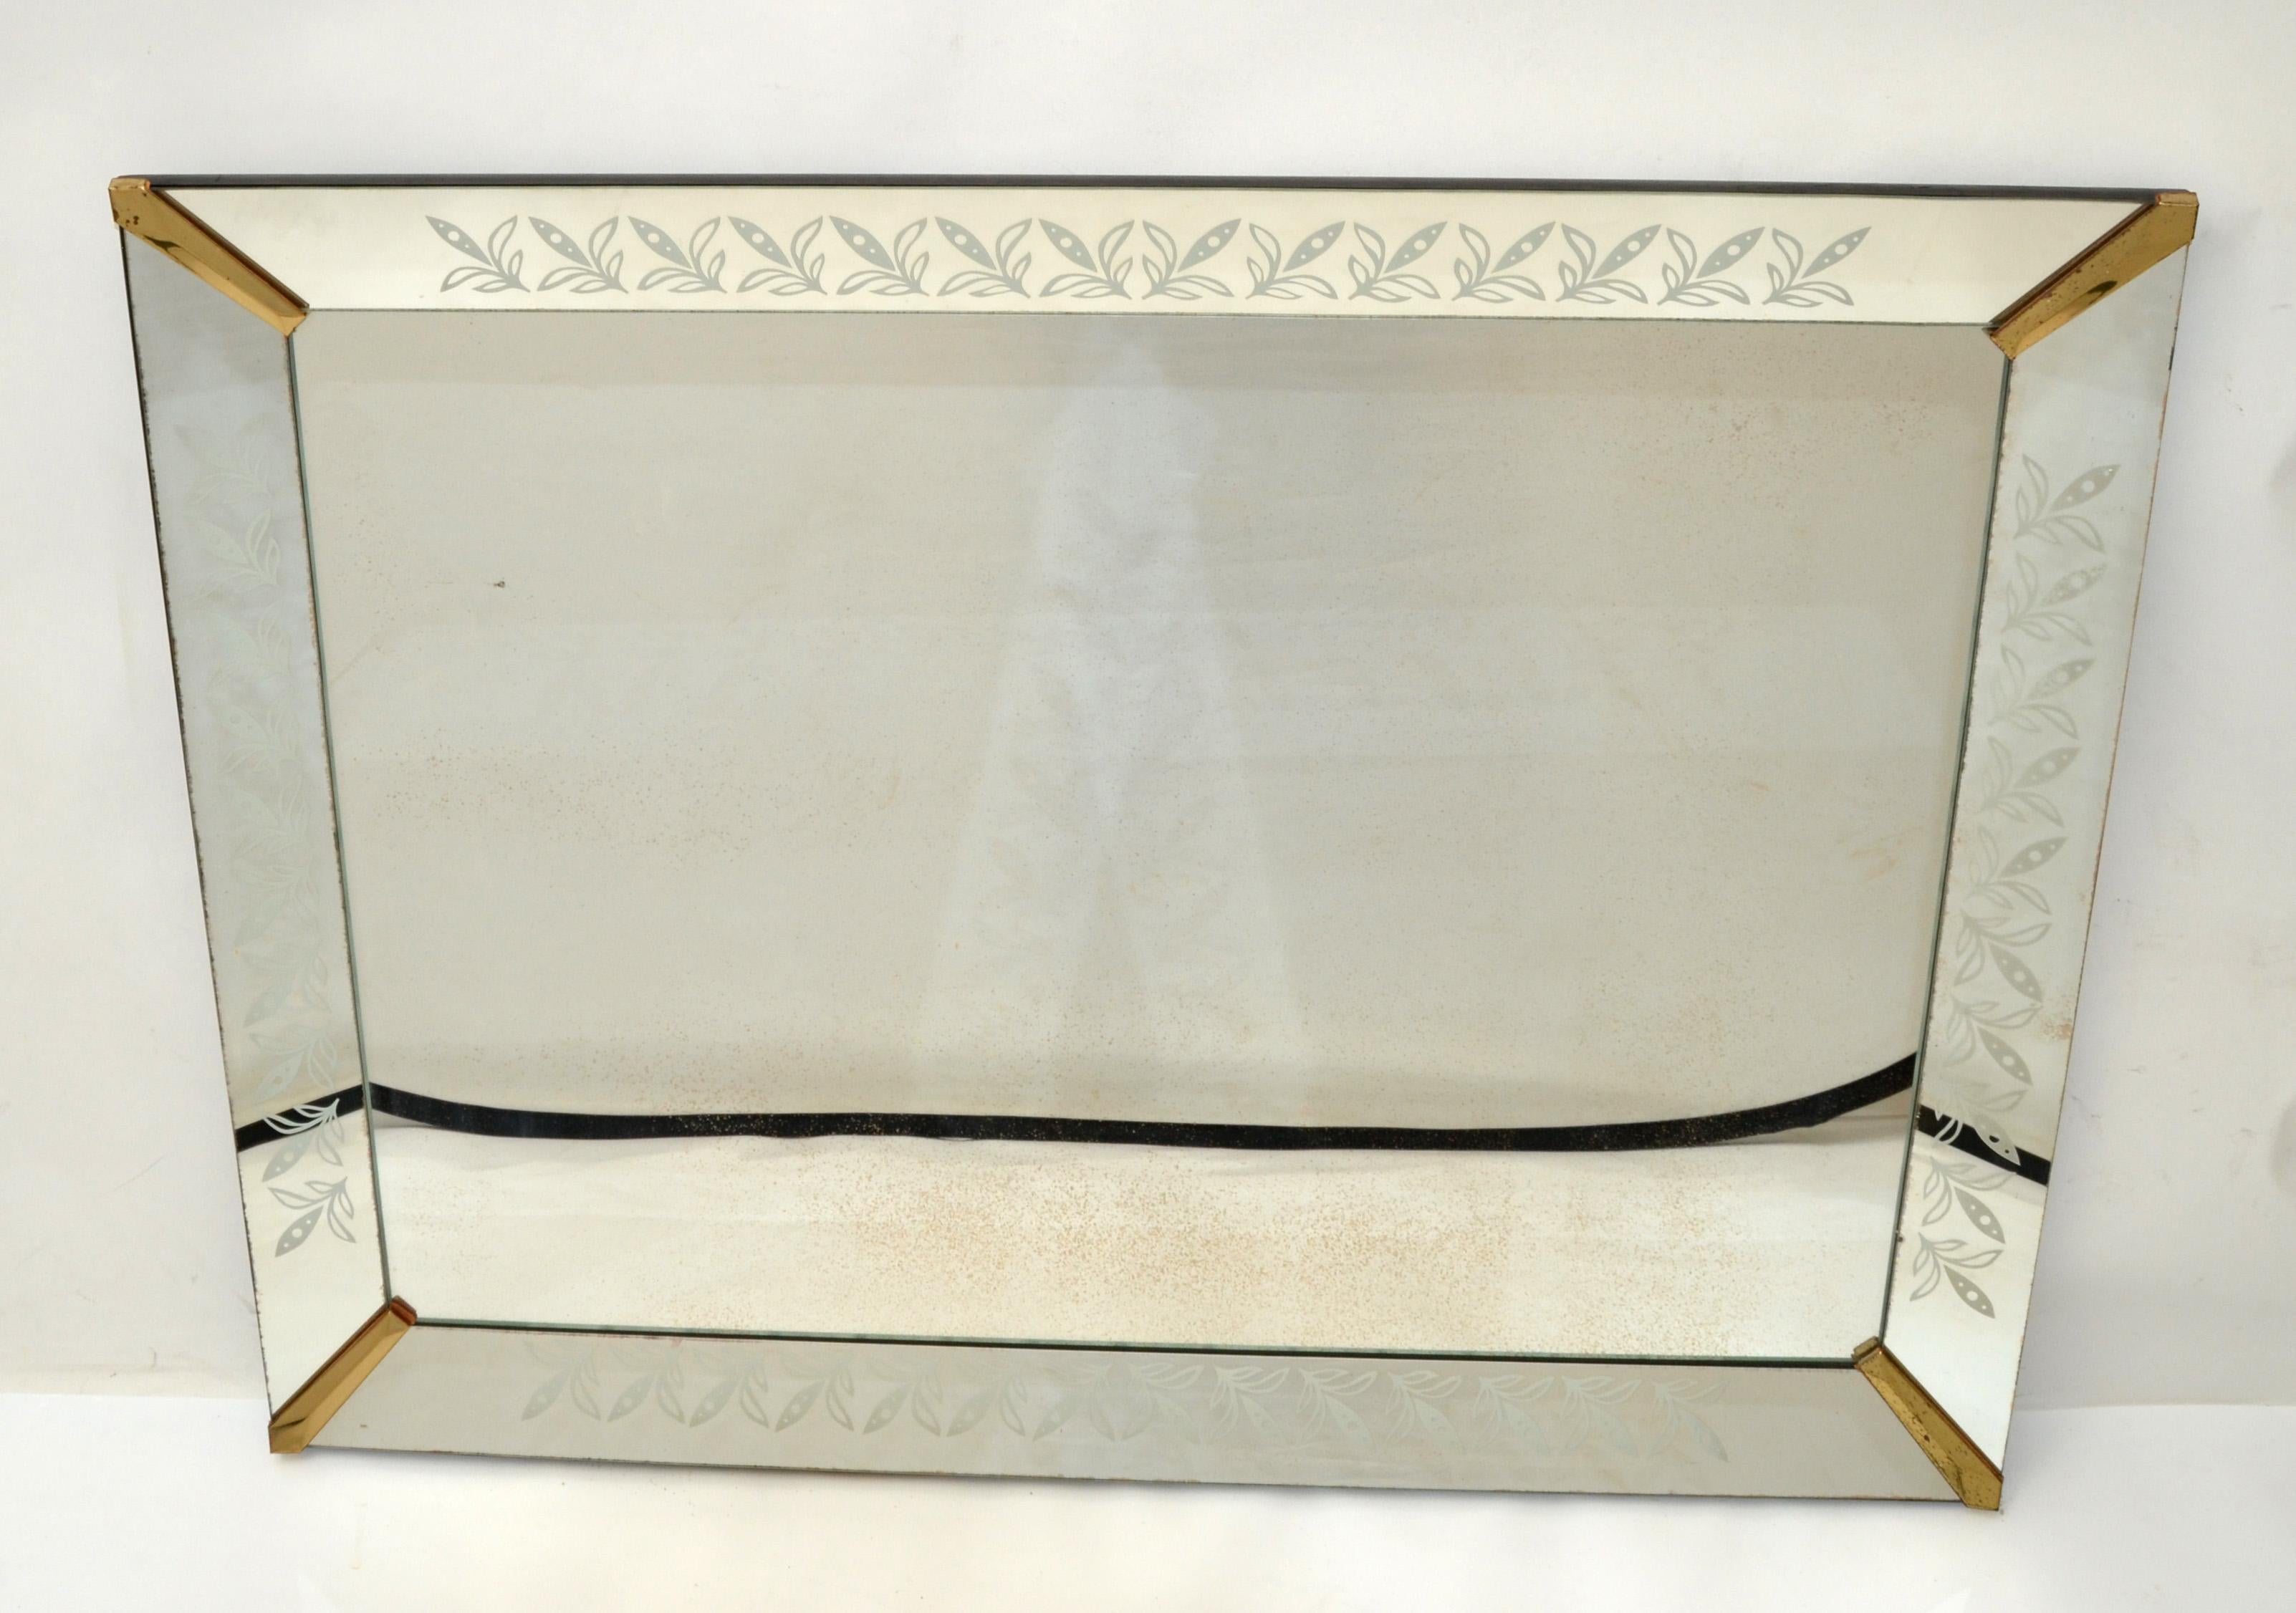 1940s Art Deco Venetian Style Etched Wall Mirror with Brass Finished Corners 1